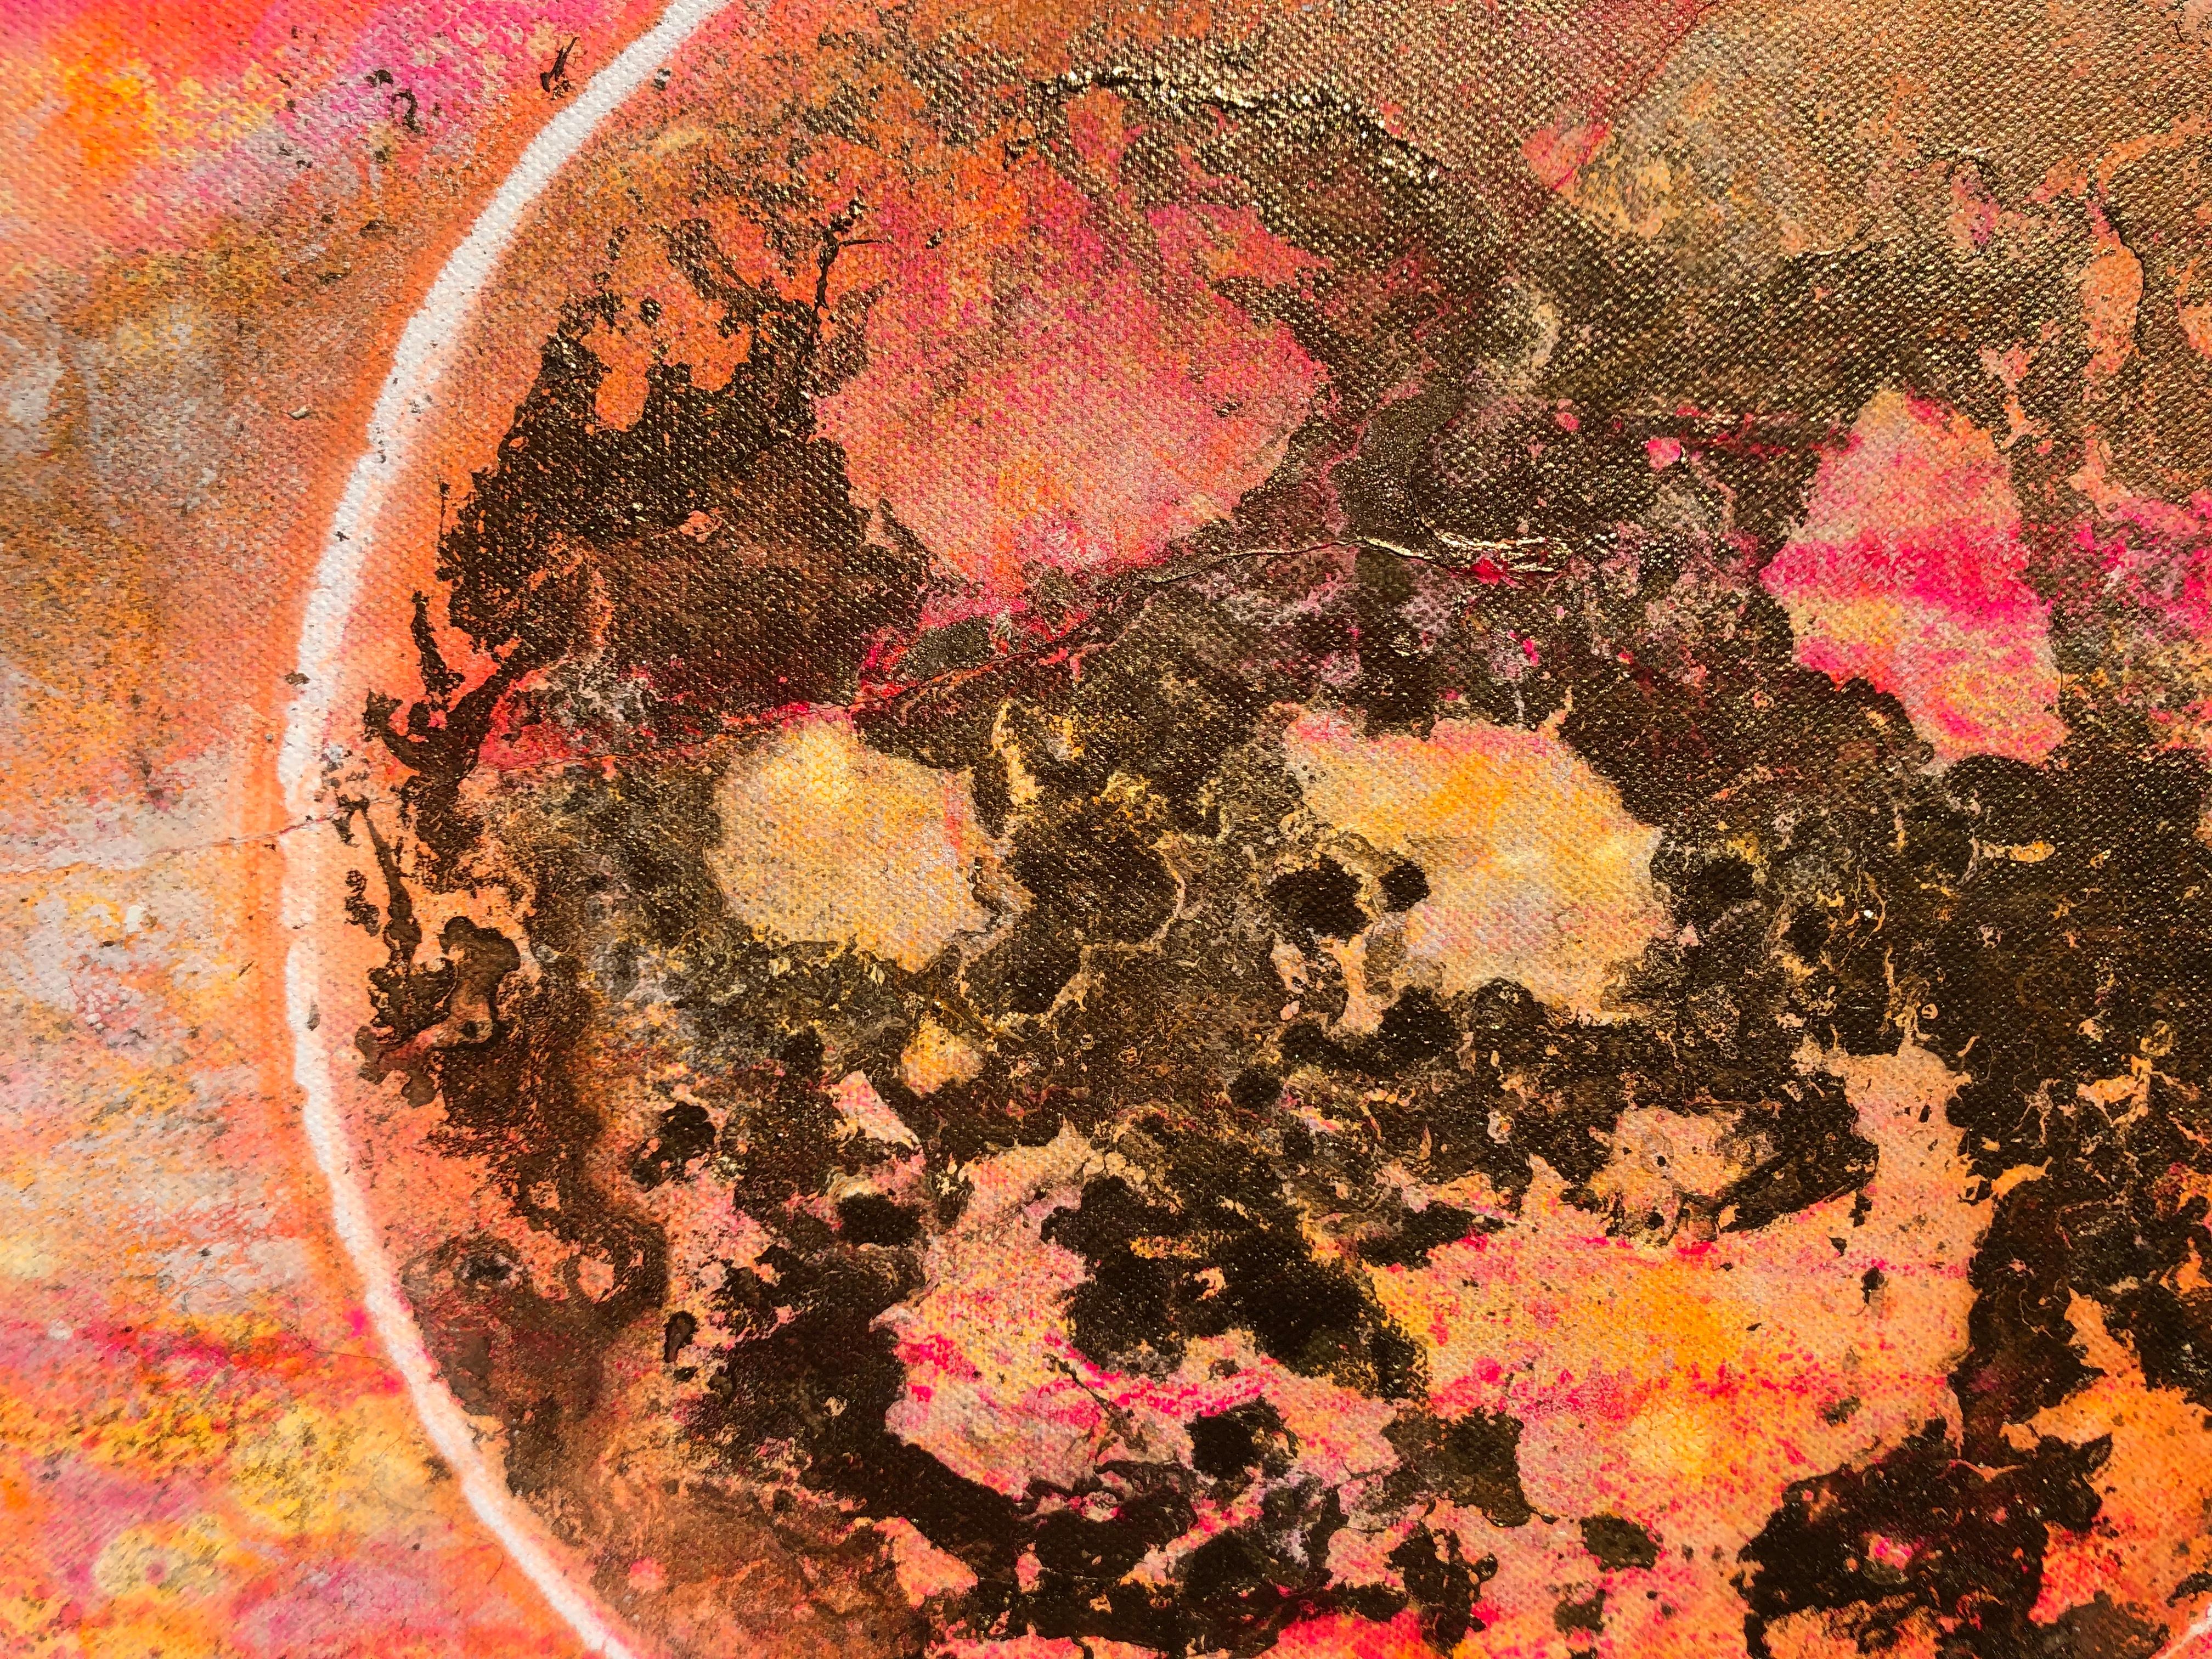 Morning levitation 2 - Painting on canvas, abstract metaphysical, gold, pink im Angebot 7